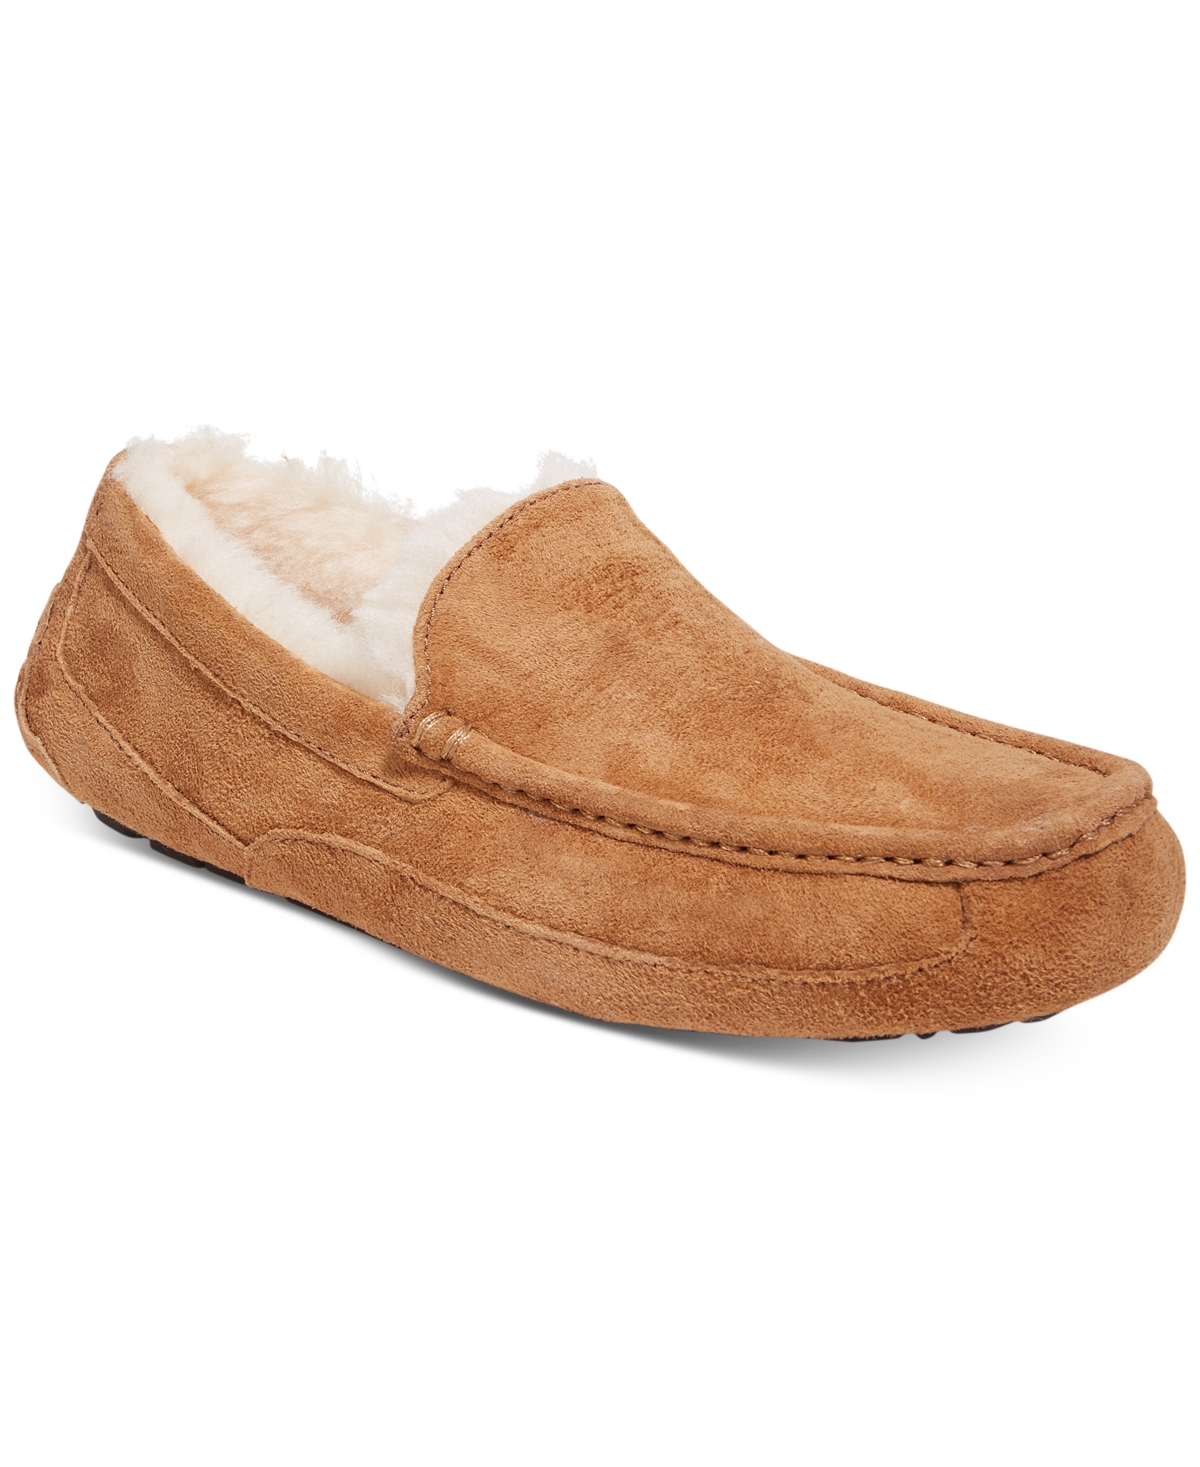 Men's Ascot Moccasin Slippers - Forest Night